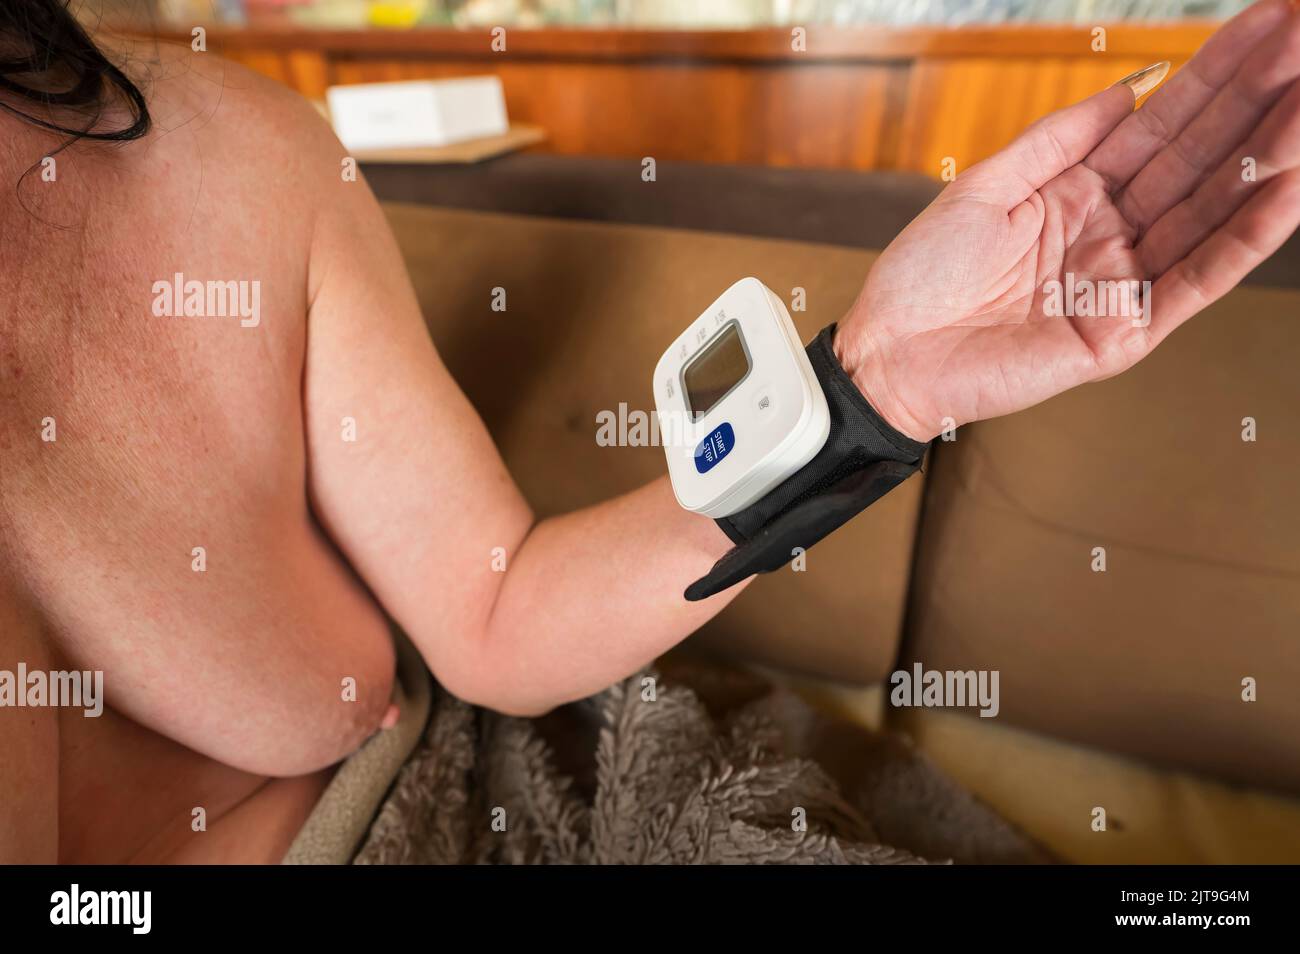 A woman with taking blood pressure Stock Photo